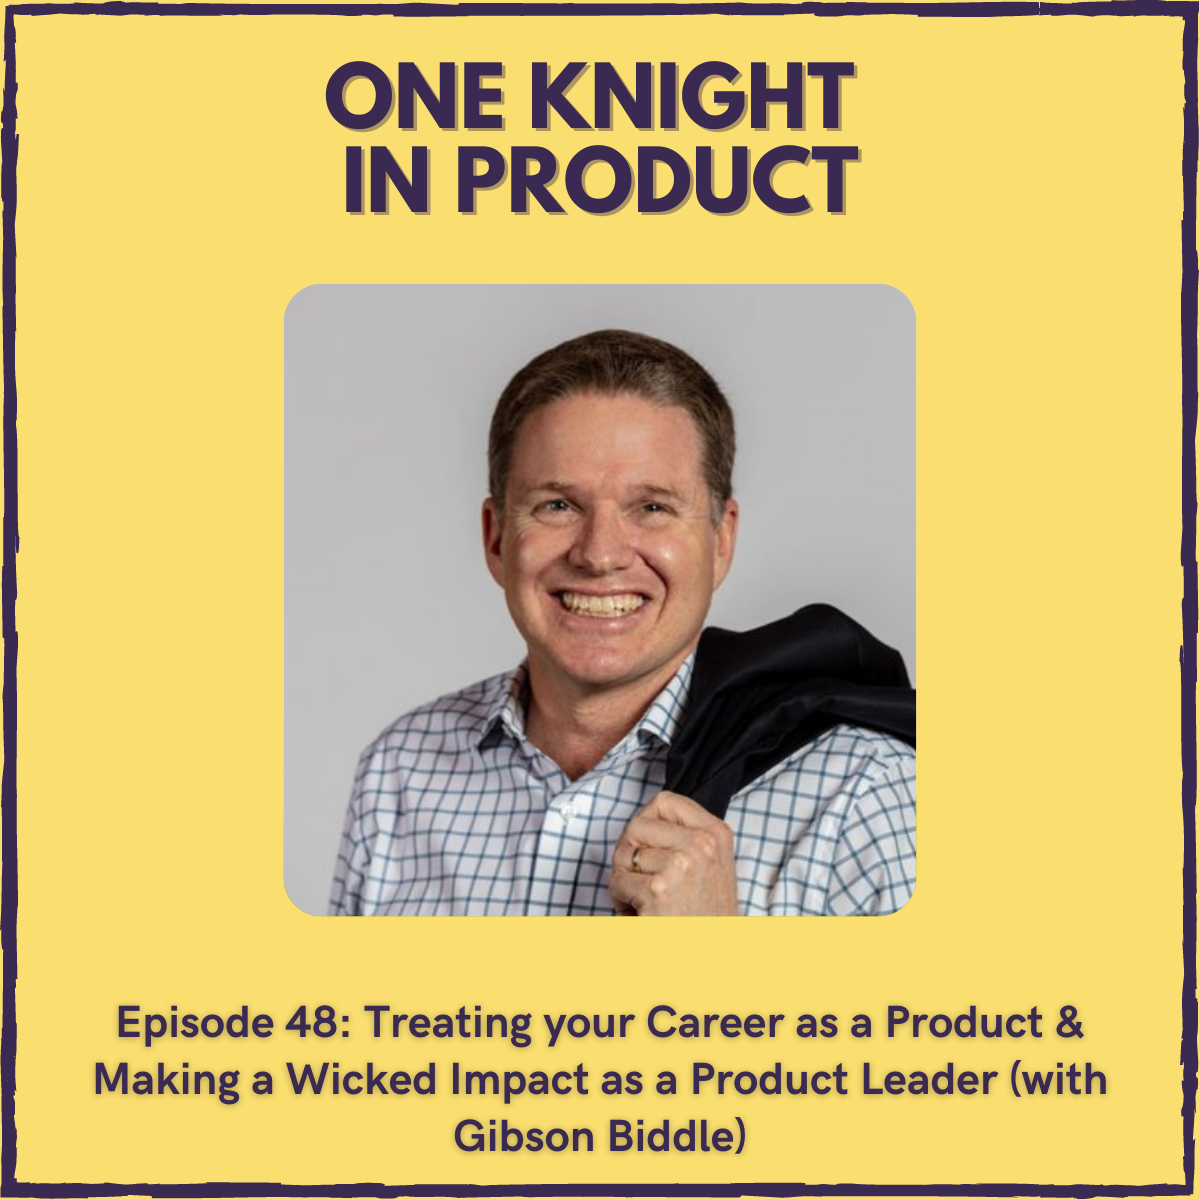 Treating your Career as a Product & Making a Wicked Impact as a Product Leader (with Gibson Biddle, former VP Product @ Netflix)